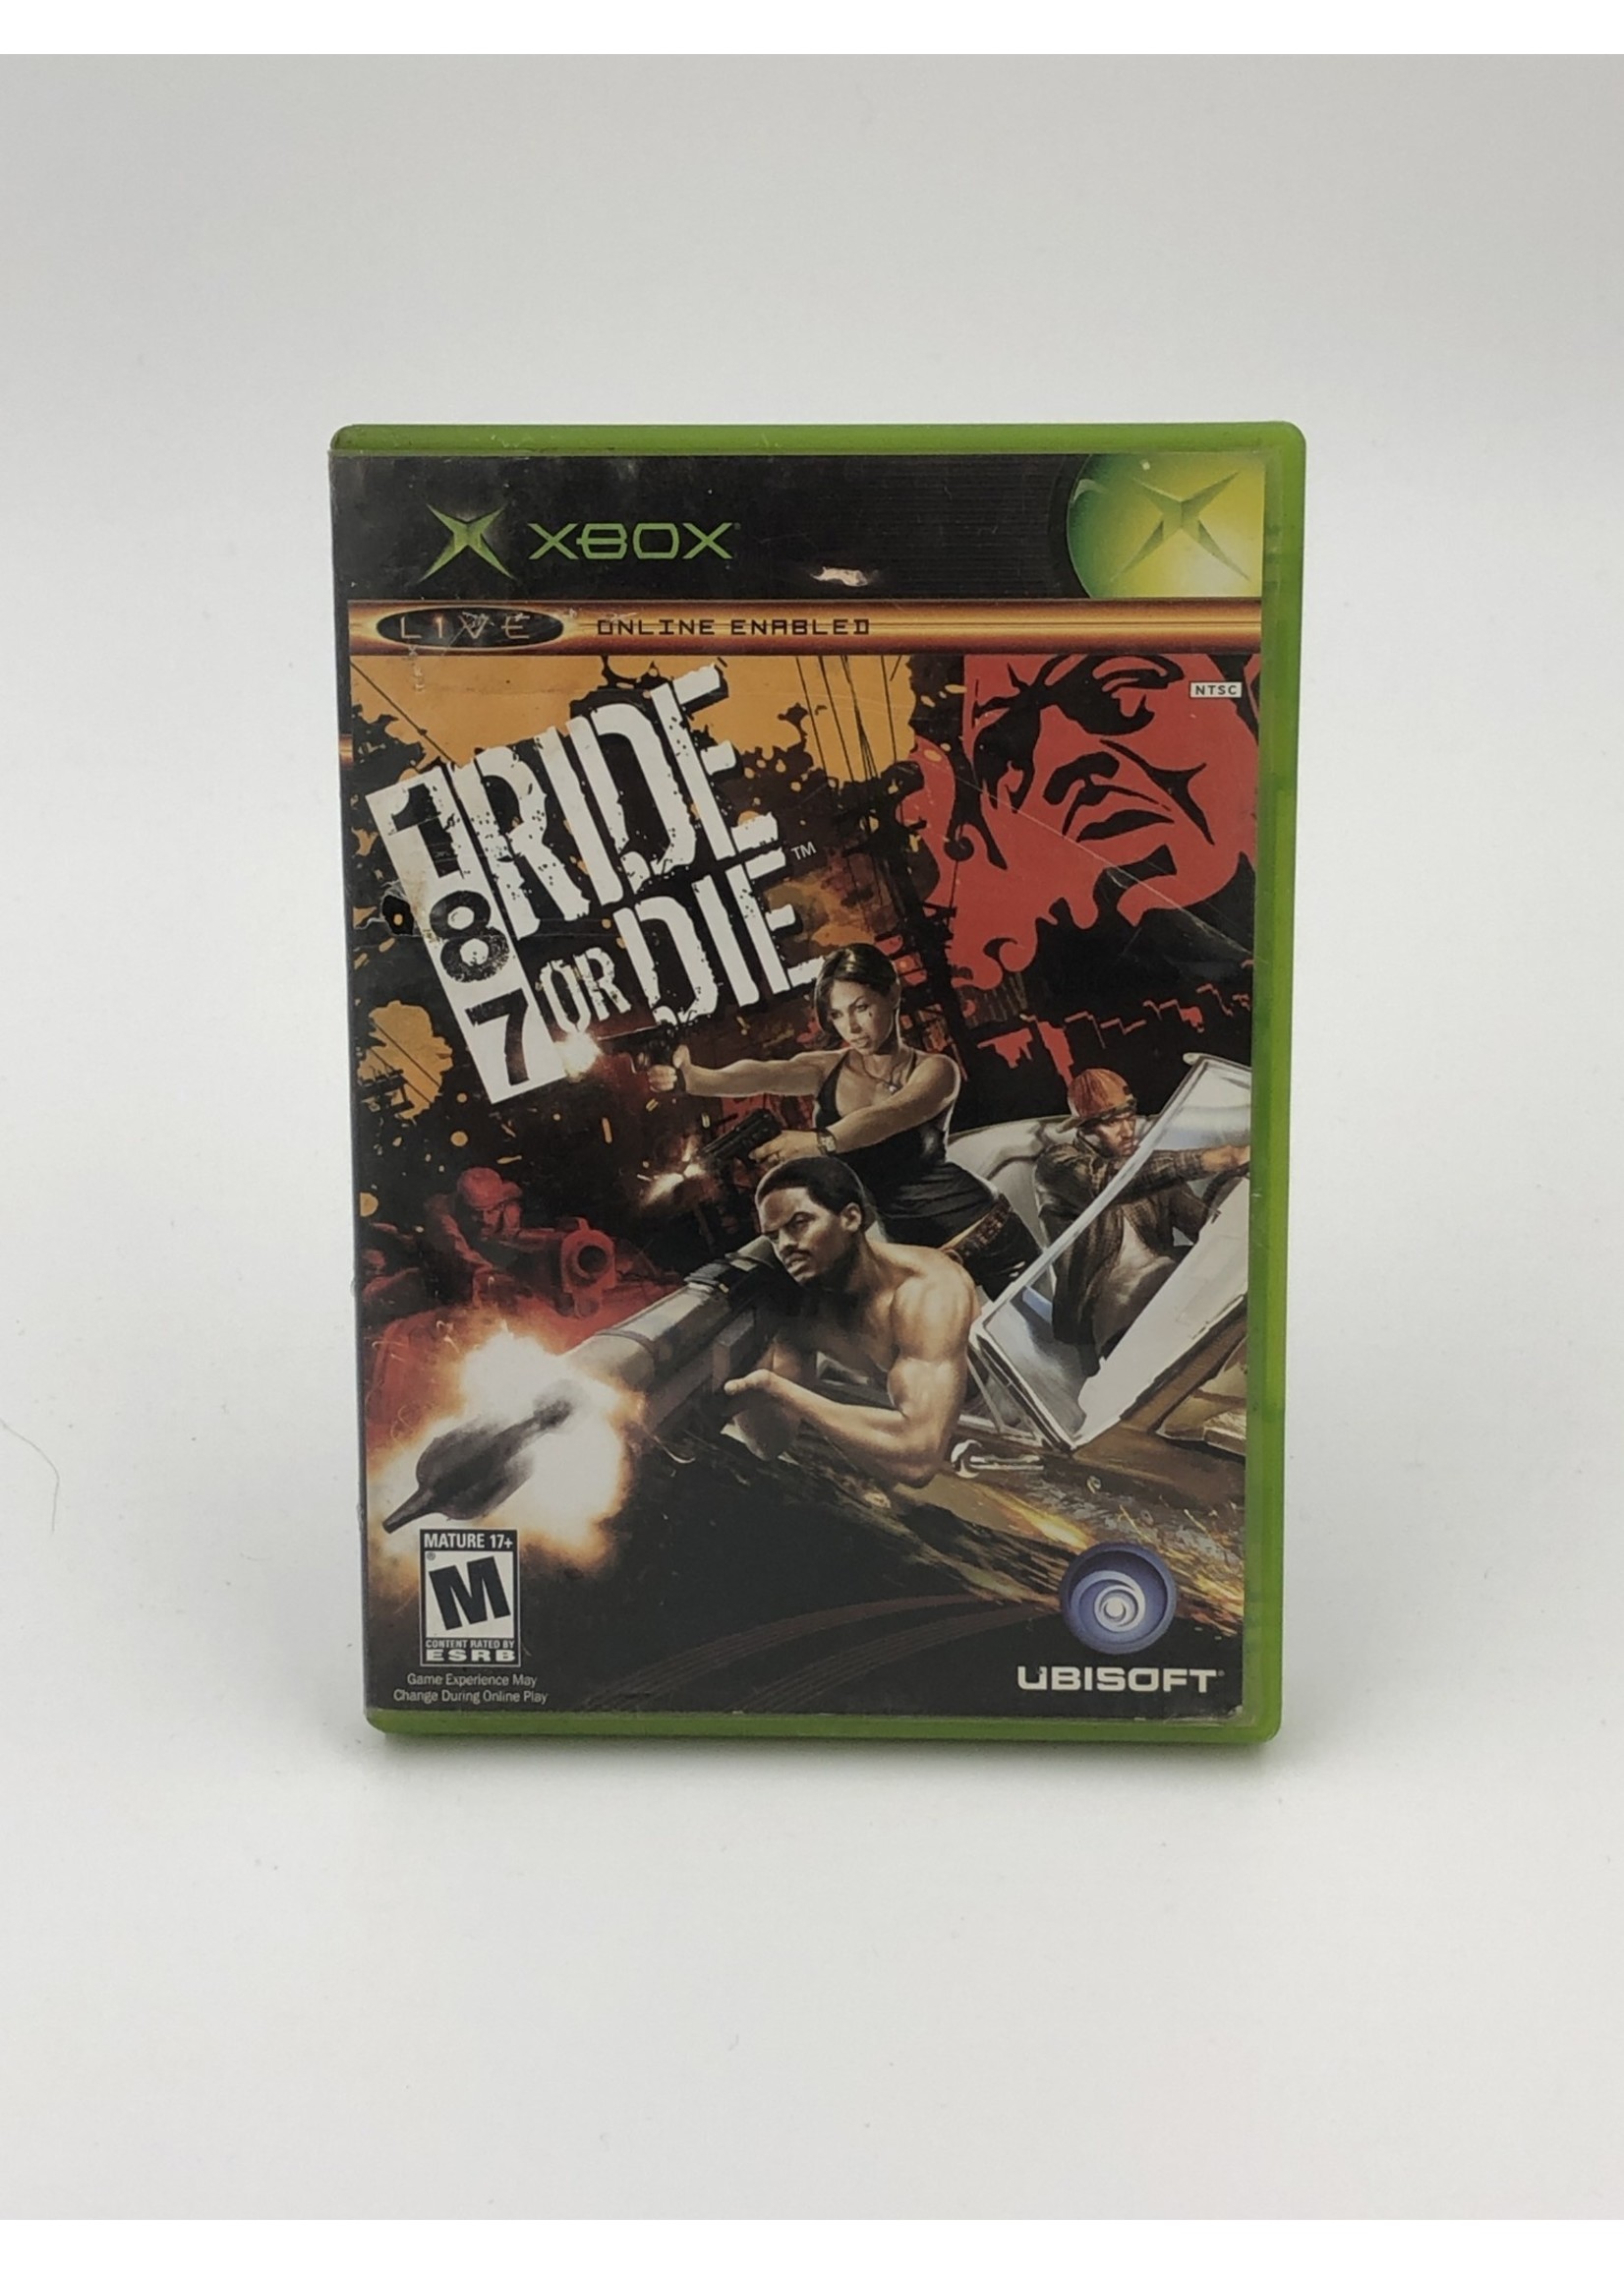 Xbox 187: Ride or Die - Xbox